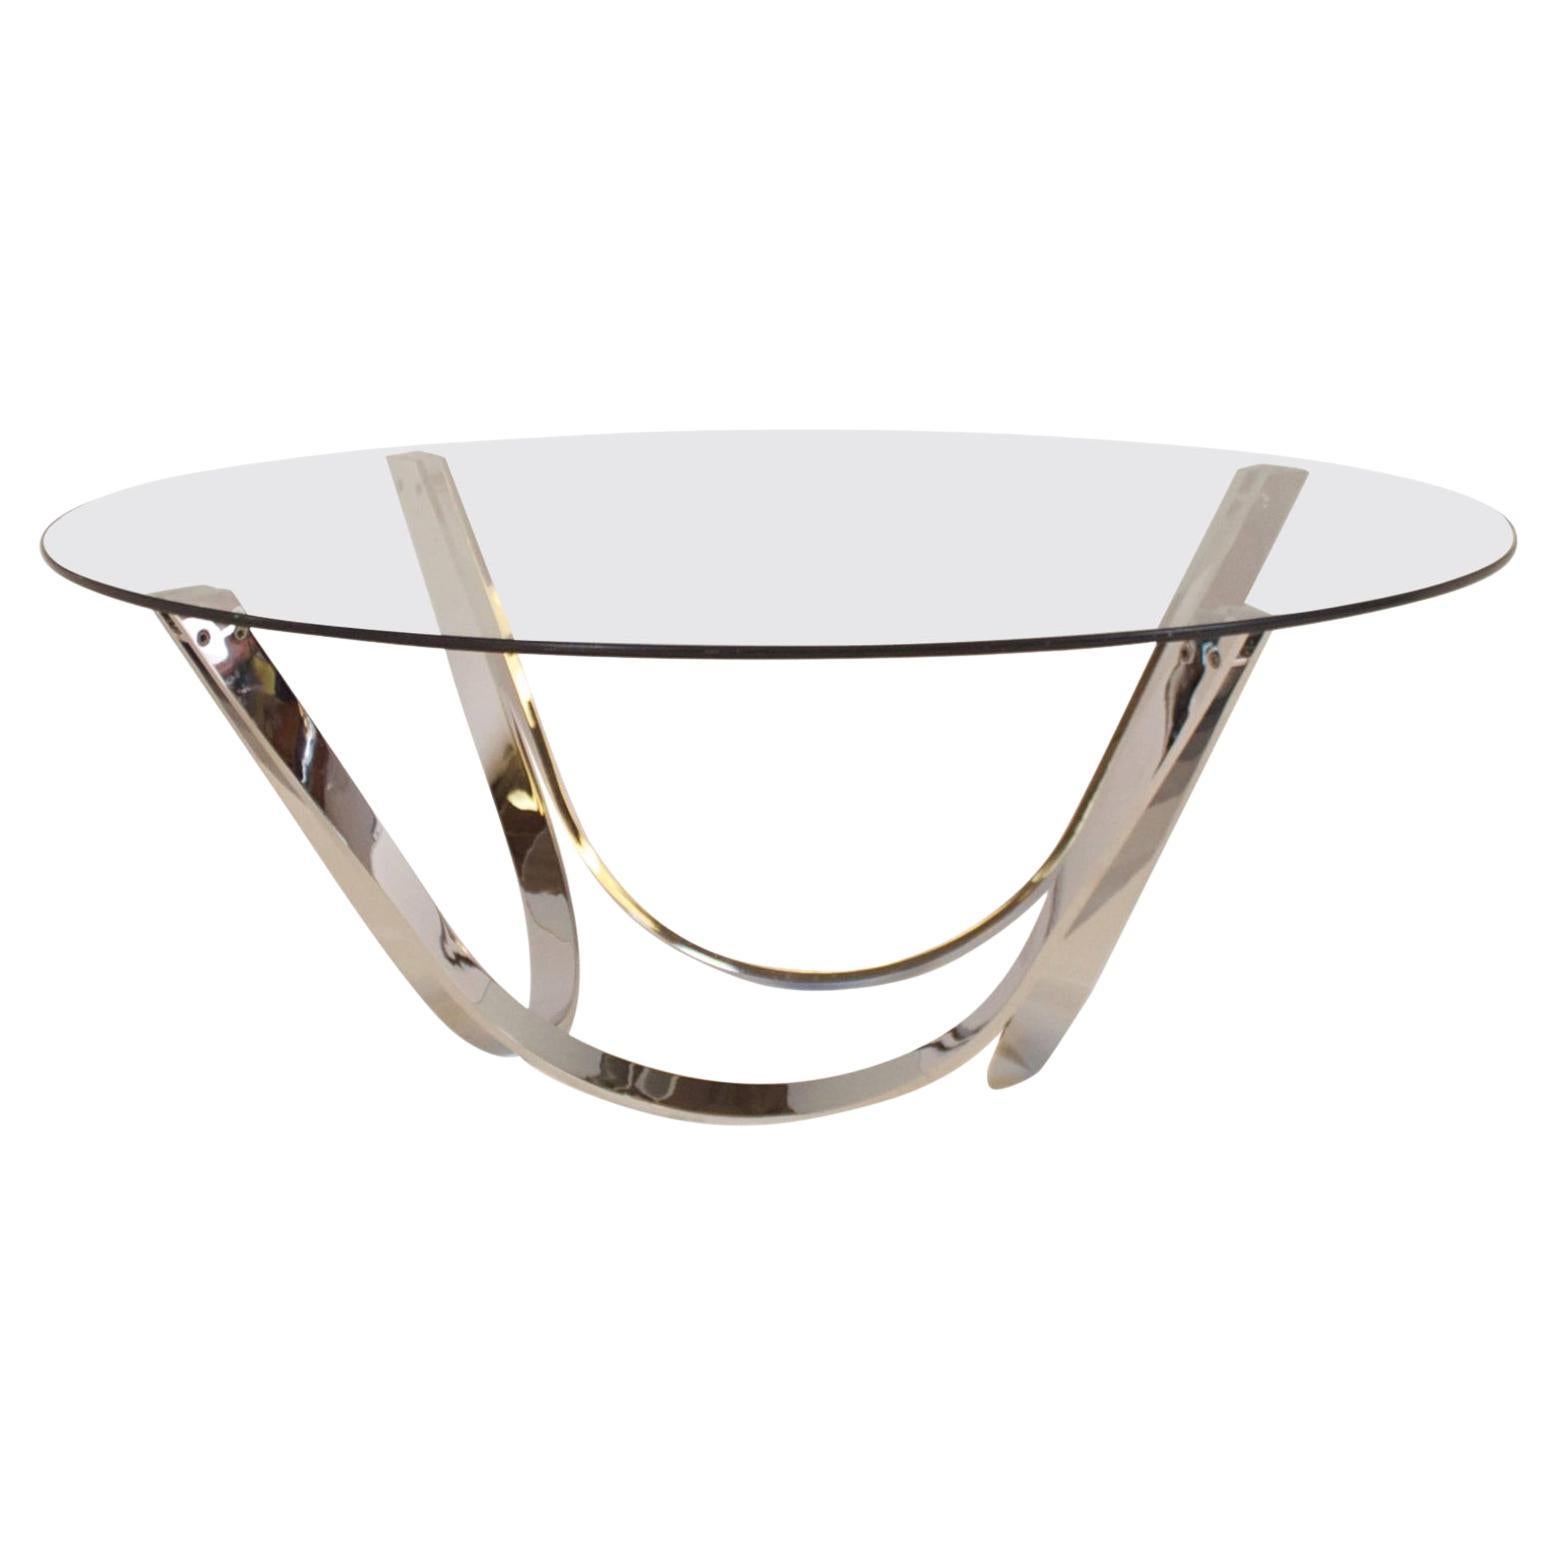 Roger Sprunger Tri-Mark Round Coffee Table with Nickel Legs and Glass Top